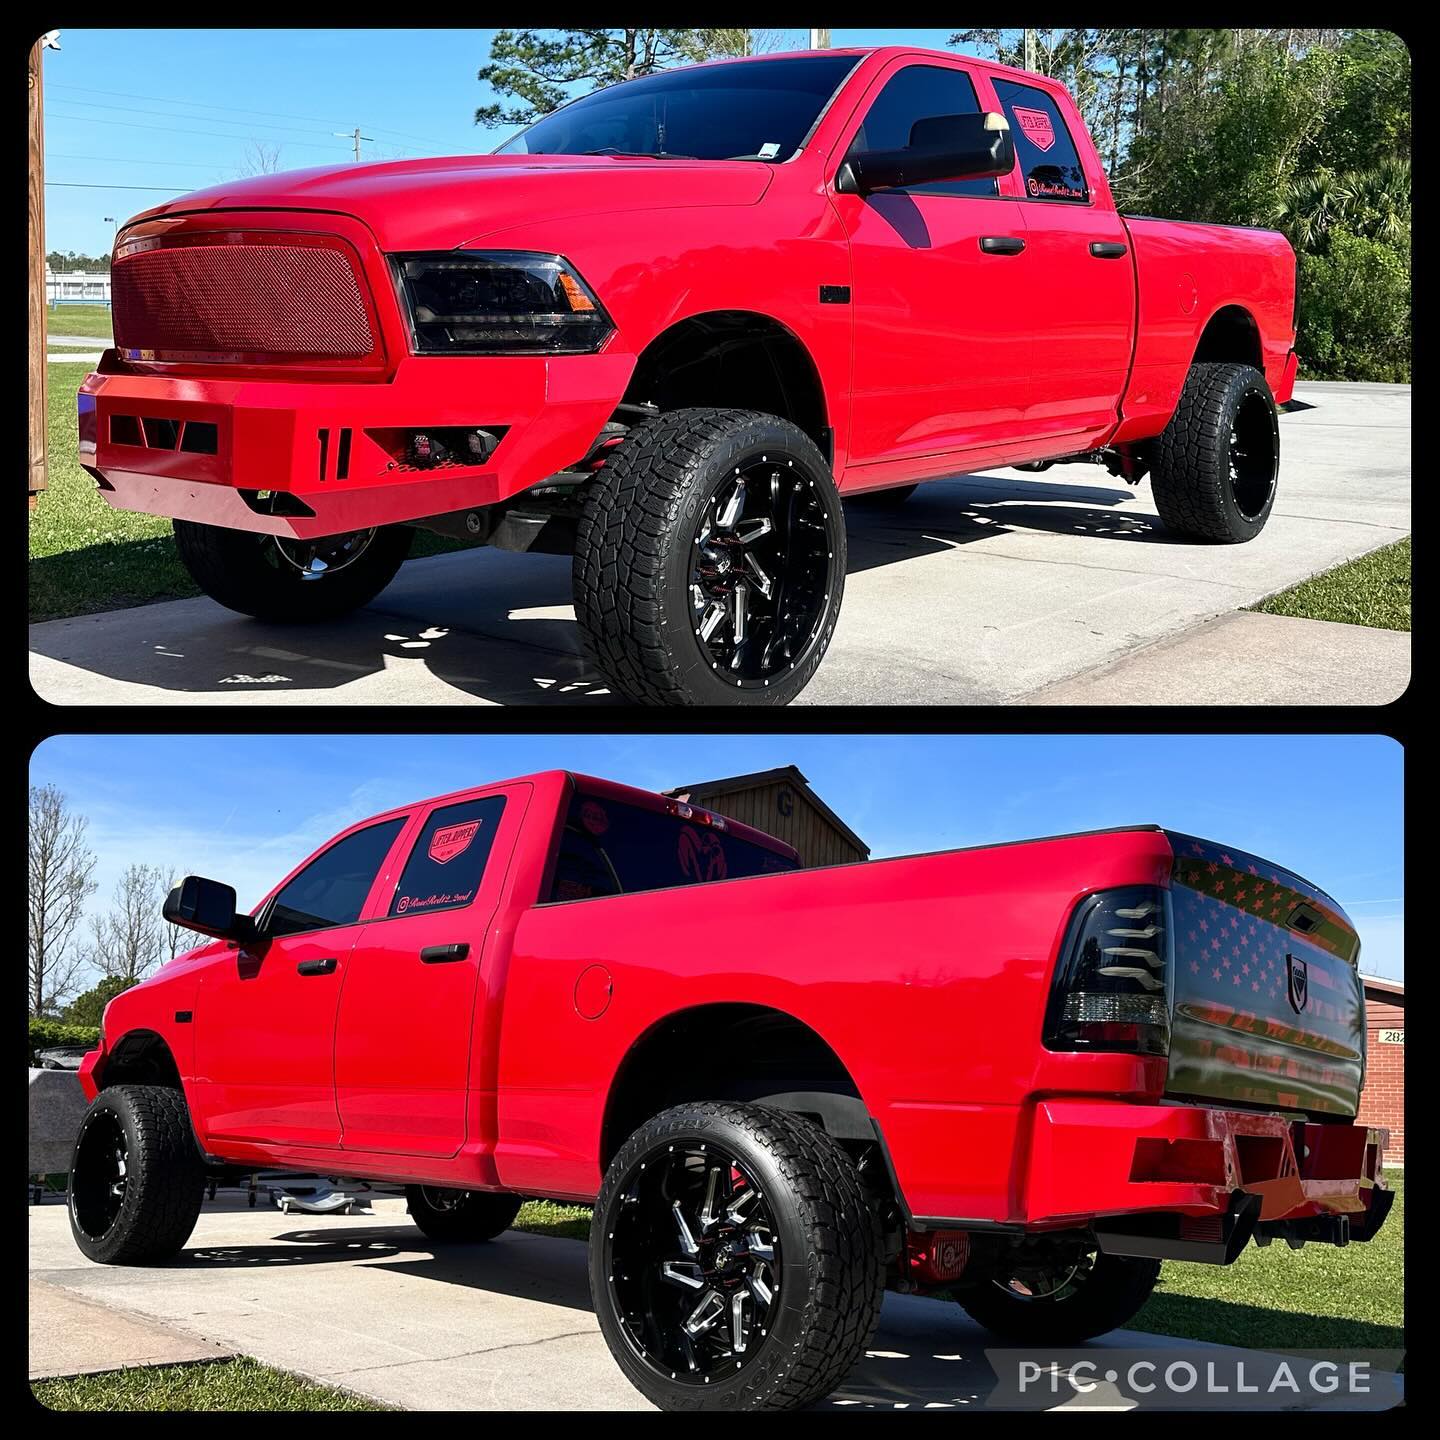 Partially done! Color matching !!! just waiting on the rest of parts to be done! ♥️🔥🔥

#PavementPrincess #Ram #RoughCountry #HornBlaster #VisionWheels #CustomOffsets #TruckPorn #Effenfast #GenYHitch #truespikelugnuts #BoltLock #theskynetteam #skynetflorida #skynet @visionwheel @floridaskynetteam  @theskynetteam @turbodieselbabes @queens_mafia21 @truckbabeapparel

__________SPONSORS___________
@diamonddetailingproducts Code :12_2wd
@hornblasters 
@customoffsets: Link In Bio 
: Referral :12_2wd 
@customoffsetsdaily
@genyhitch 
@boltlock
@turbodieselbabes : 12_2wd15
@truckbabeapparel  12_2wd
@vvashautocare Code: 12_2wd